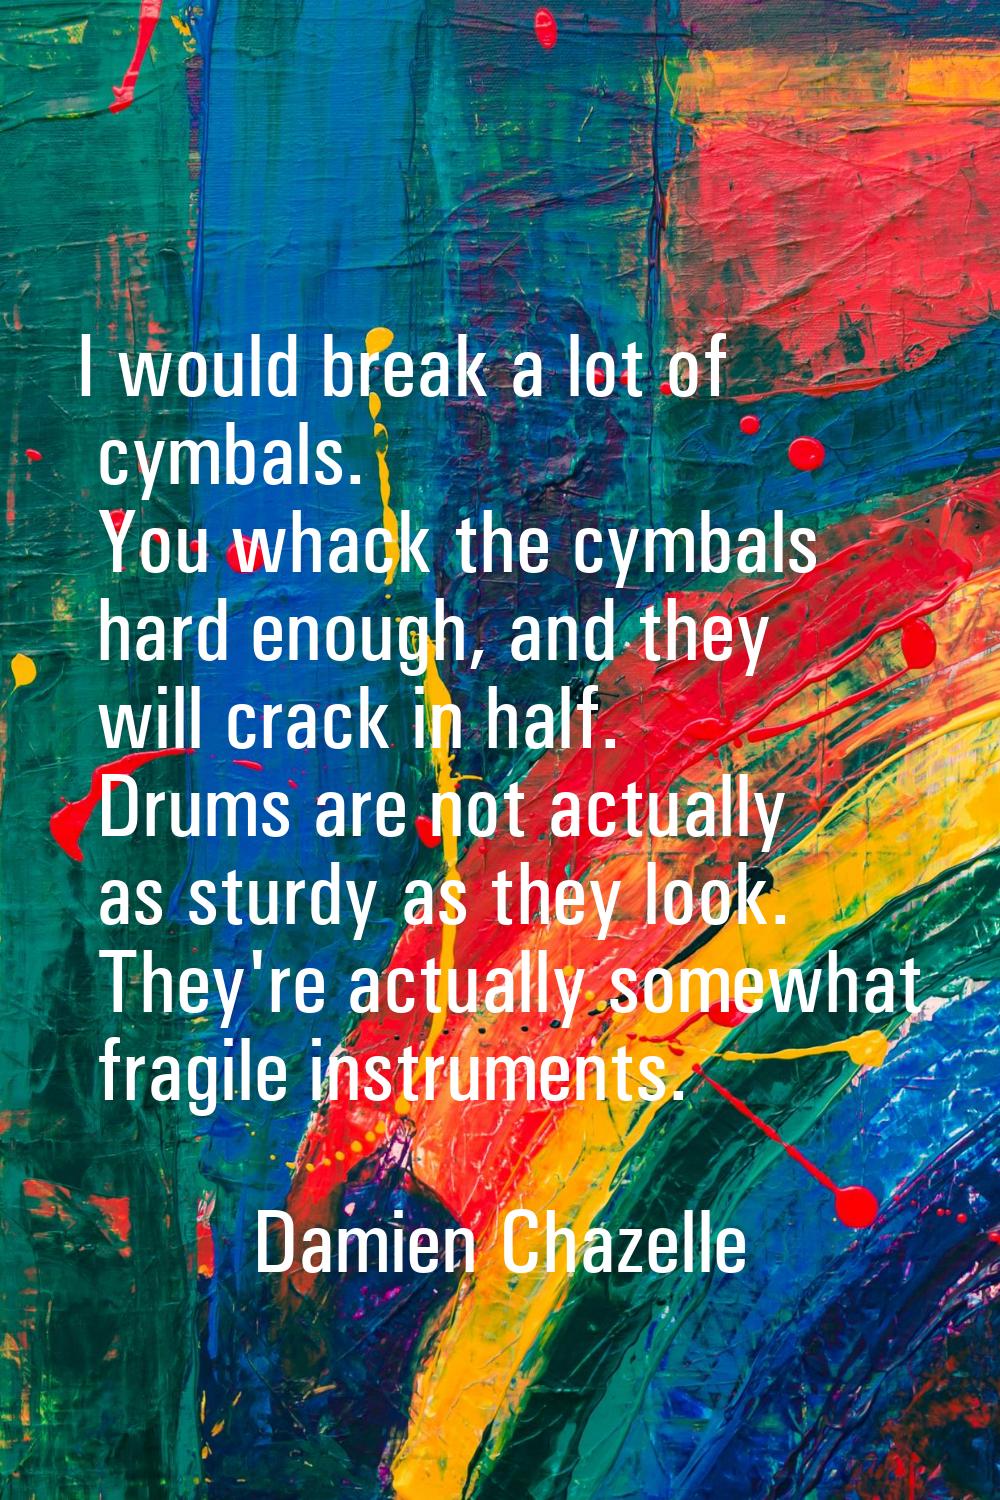 I would break a lot of cymbals. You whack the cymbals hard enough, and they will crack in half. Dru